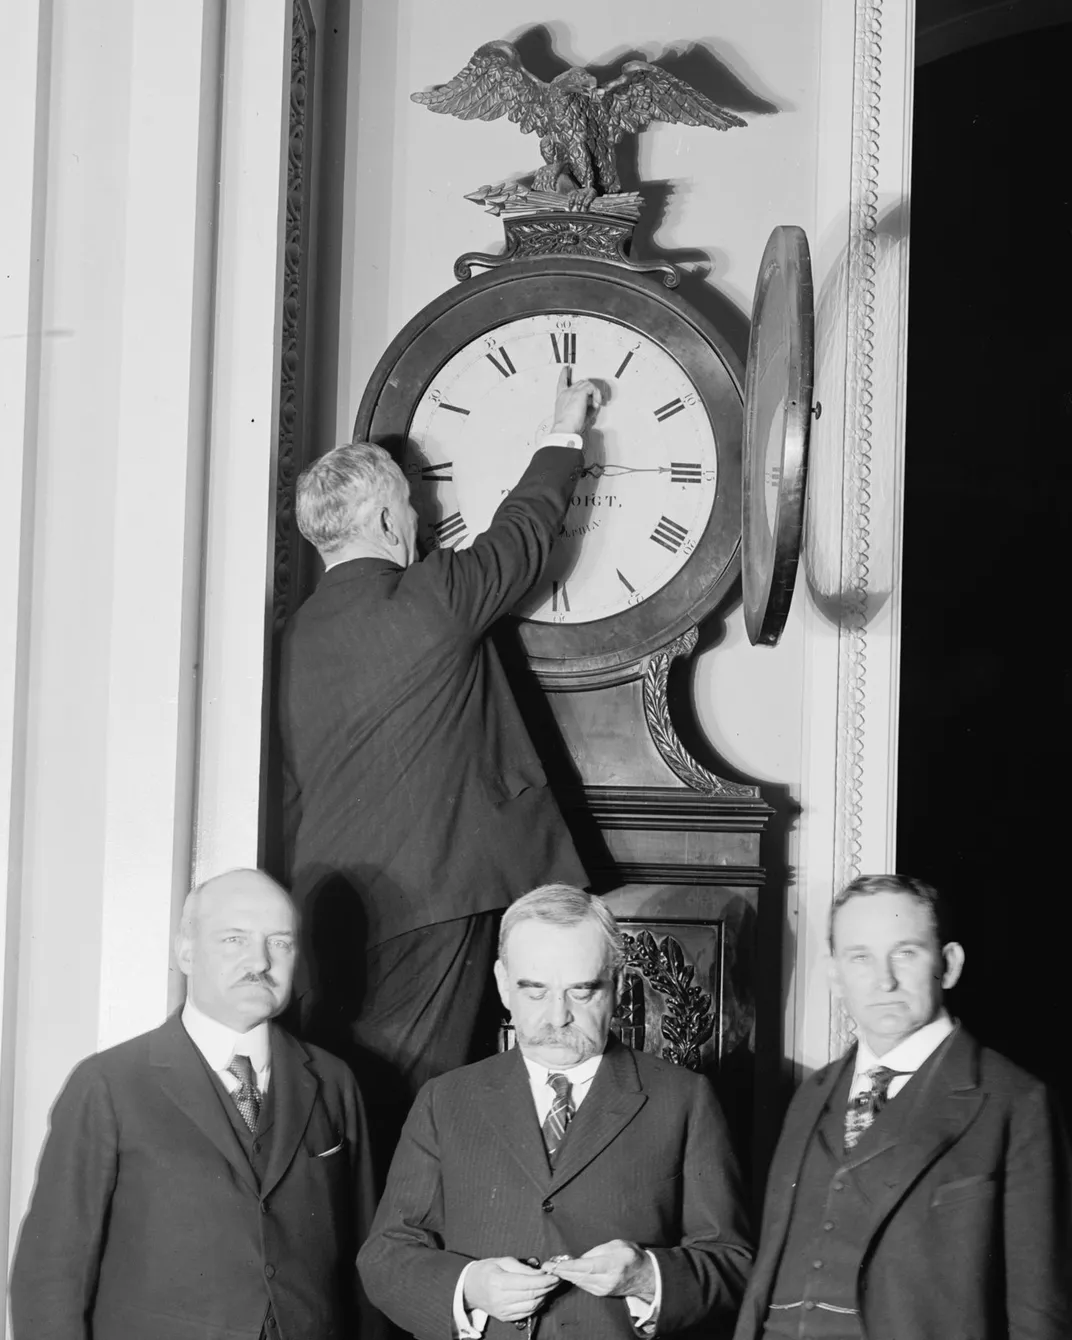 Senate sergeant charles higgins at arms moves the ohio clock at the u. S. Capitol for the nation's first daylight saving time on march 31, 1918.